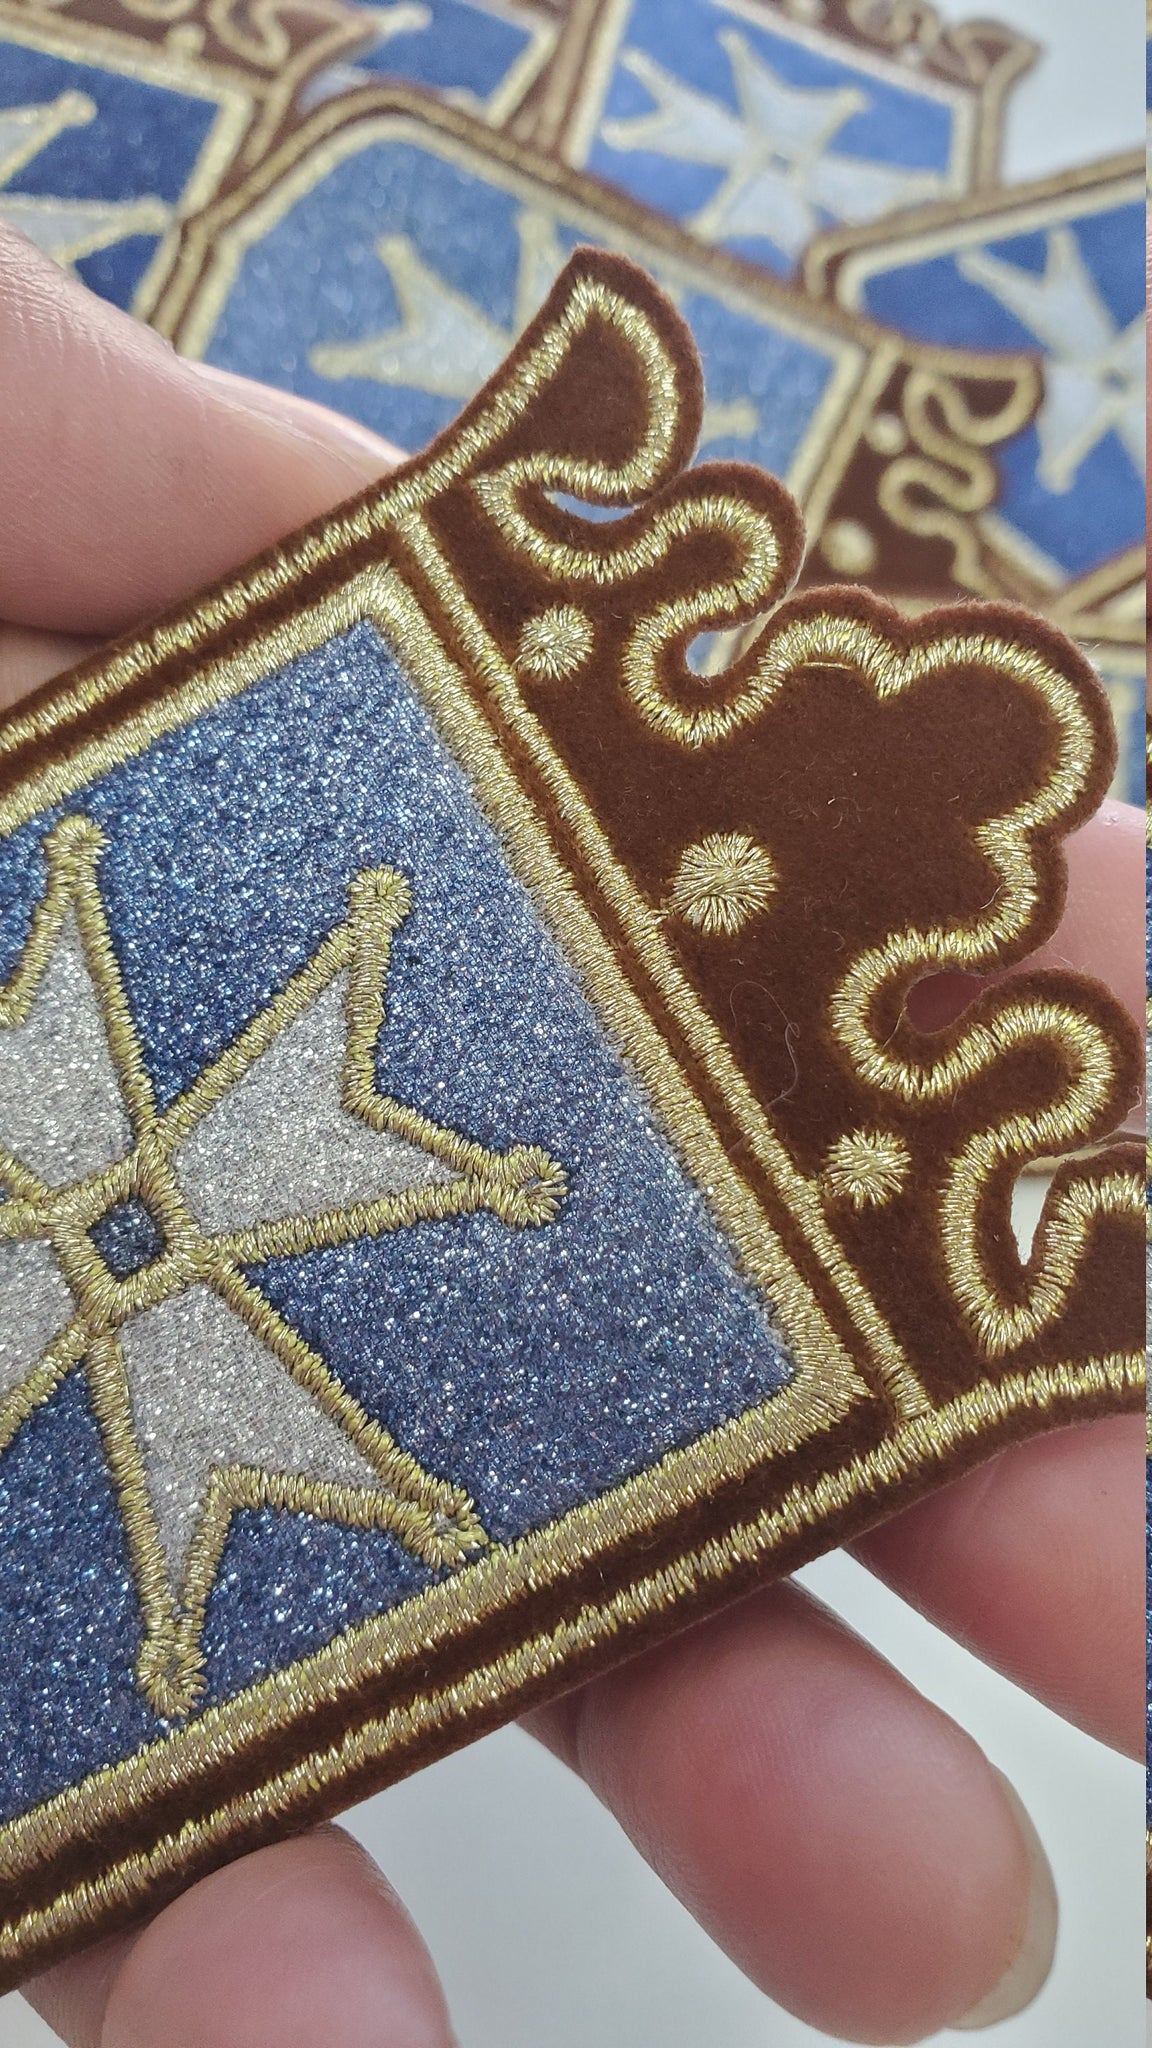 2-pc Set,"Medival Cross" Gold, Glitter, and Blue Metallic Royalty Crest with Brown Velvet, Small Emblem, Embroidered Patch, Iron-On, Size 3"